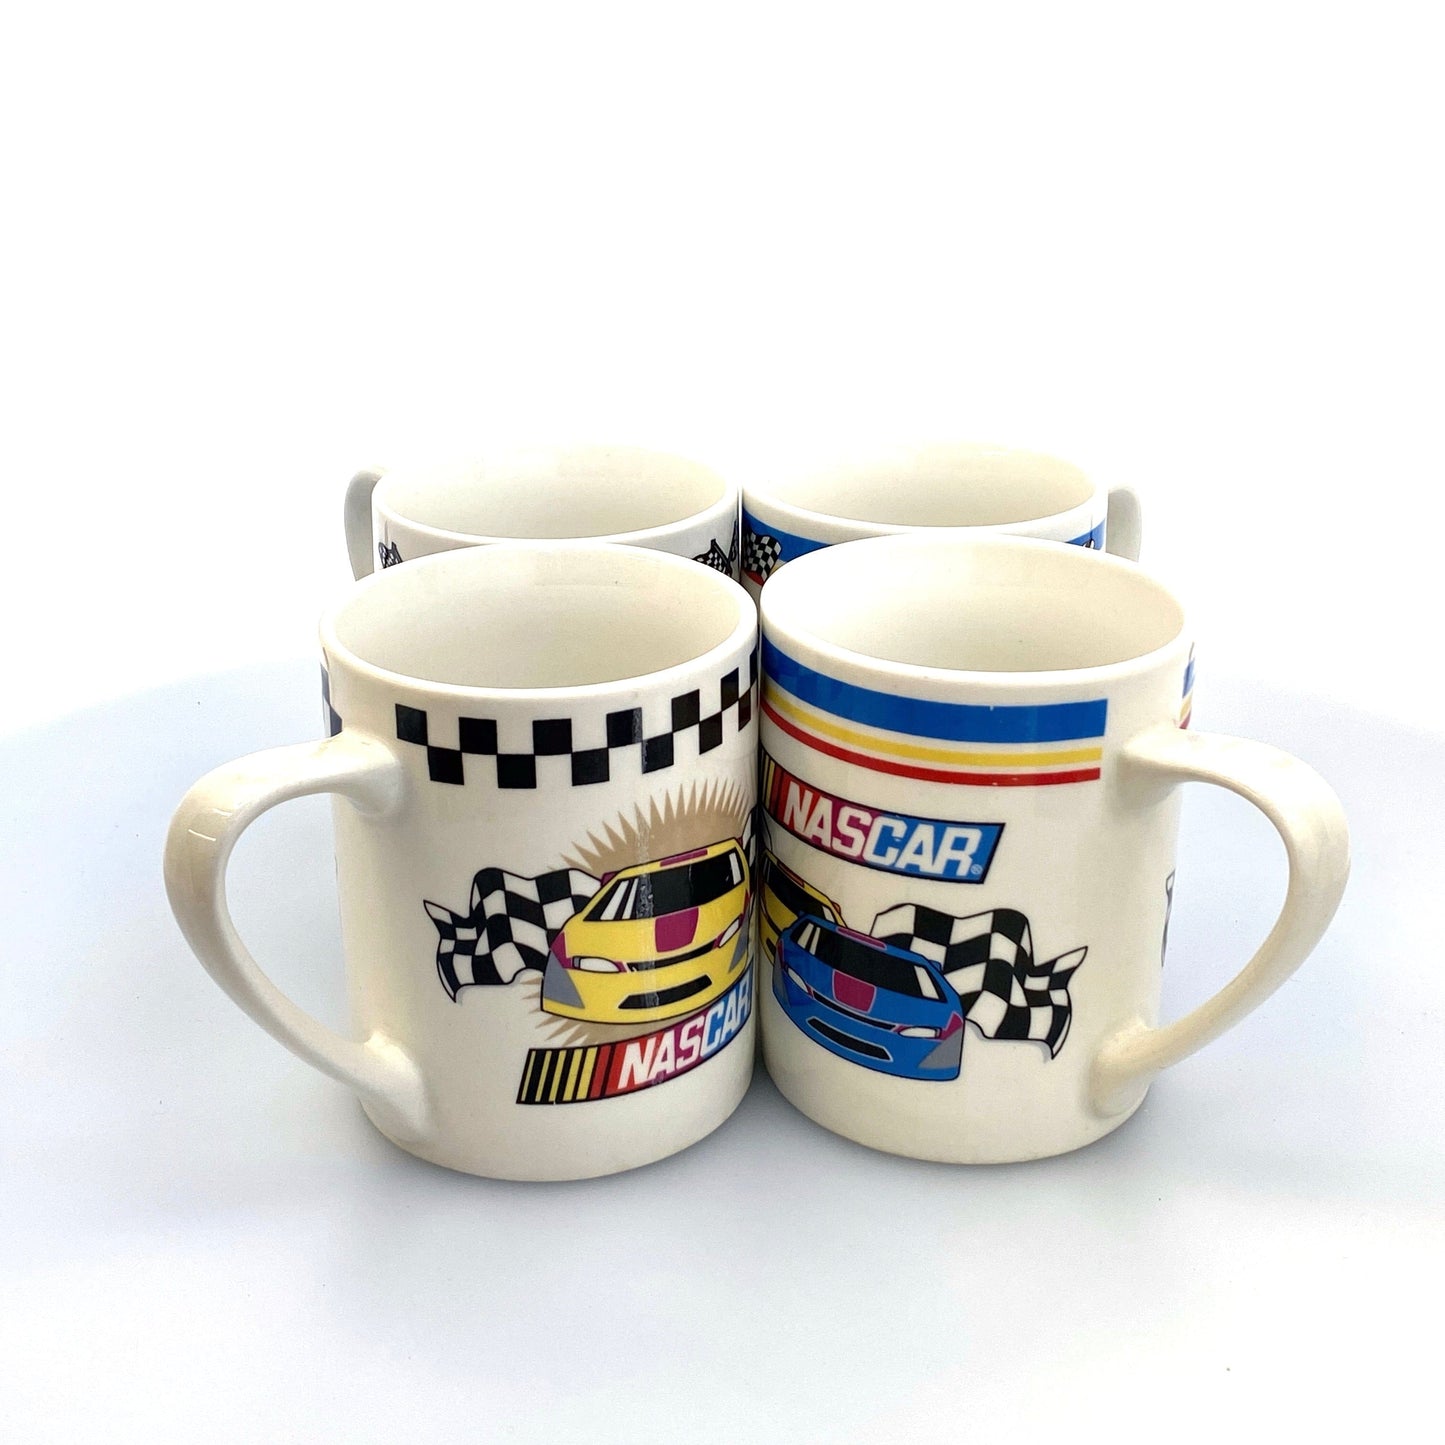 Nascar Coffee Cups Set of 4 Marketed by Gibson 2002 Licensed by Nascar